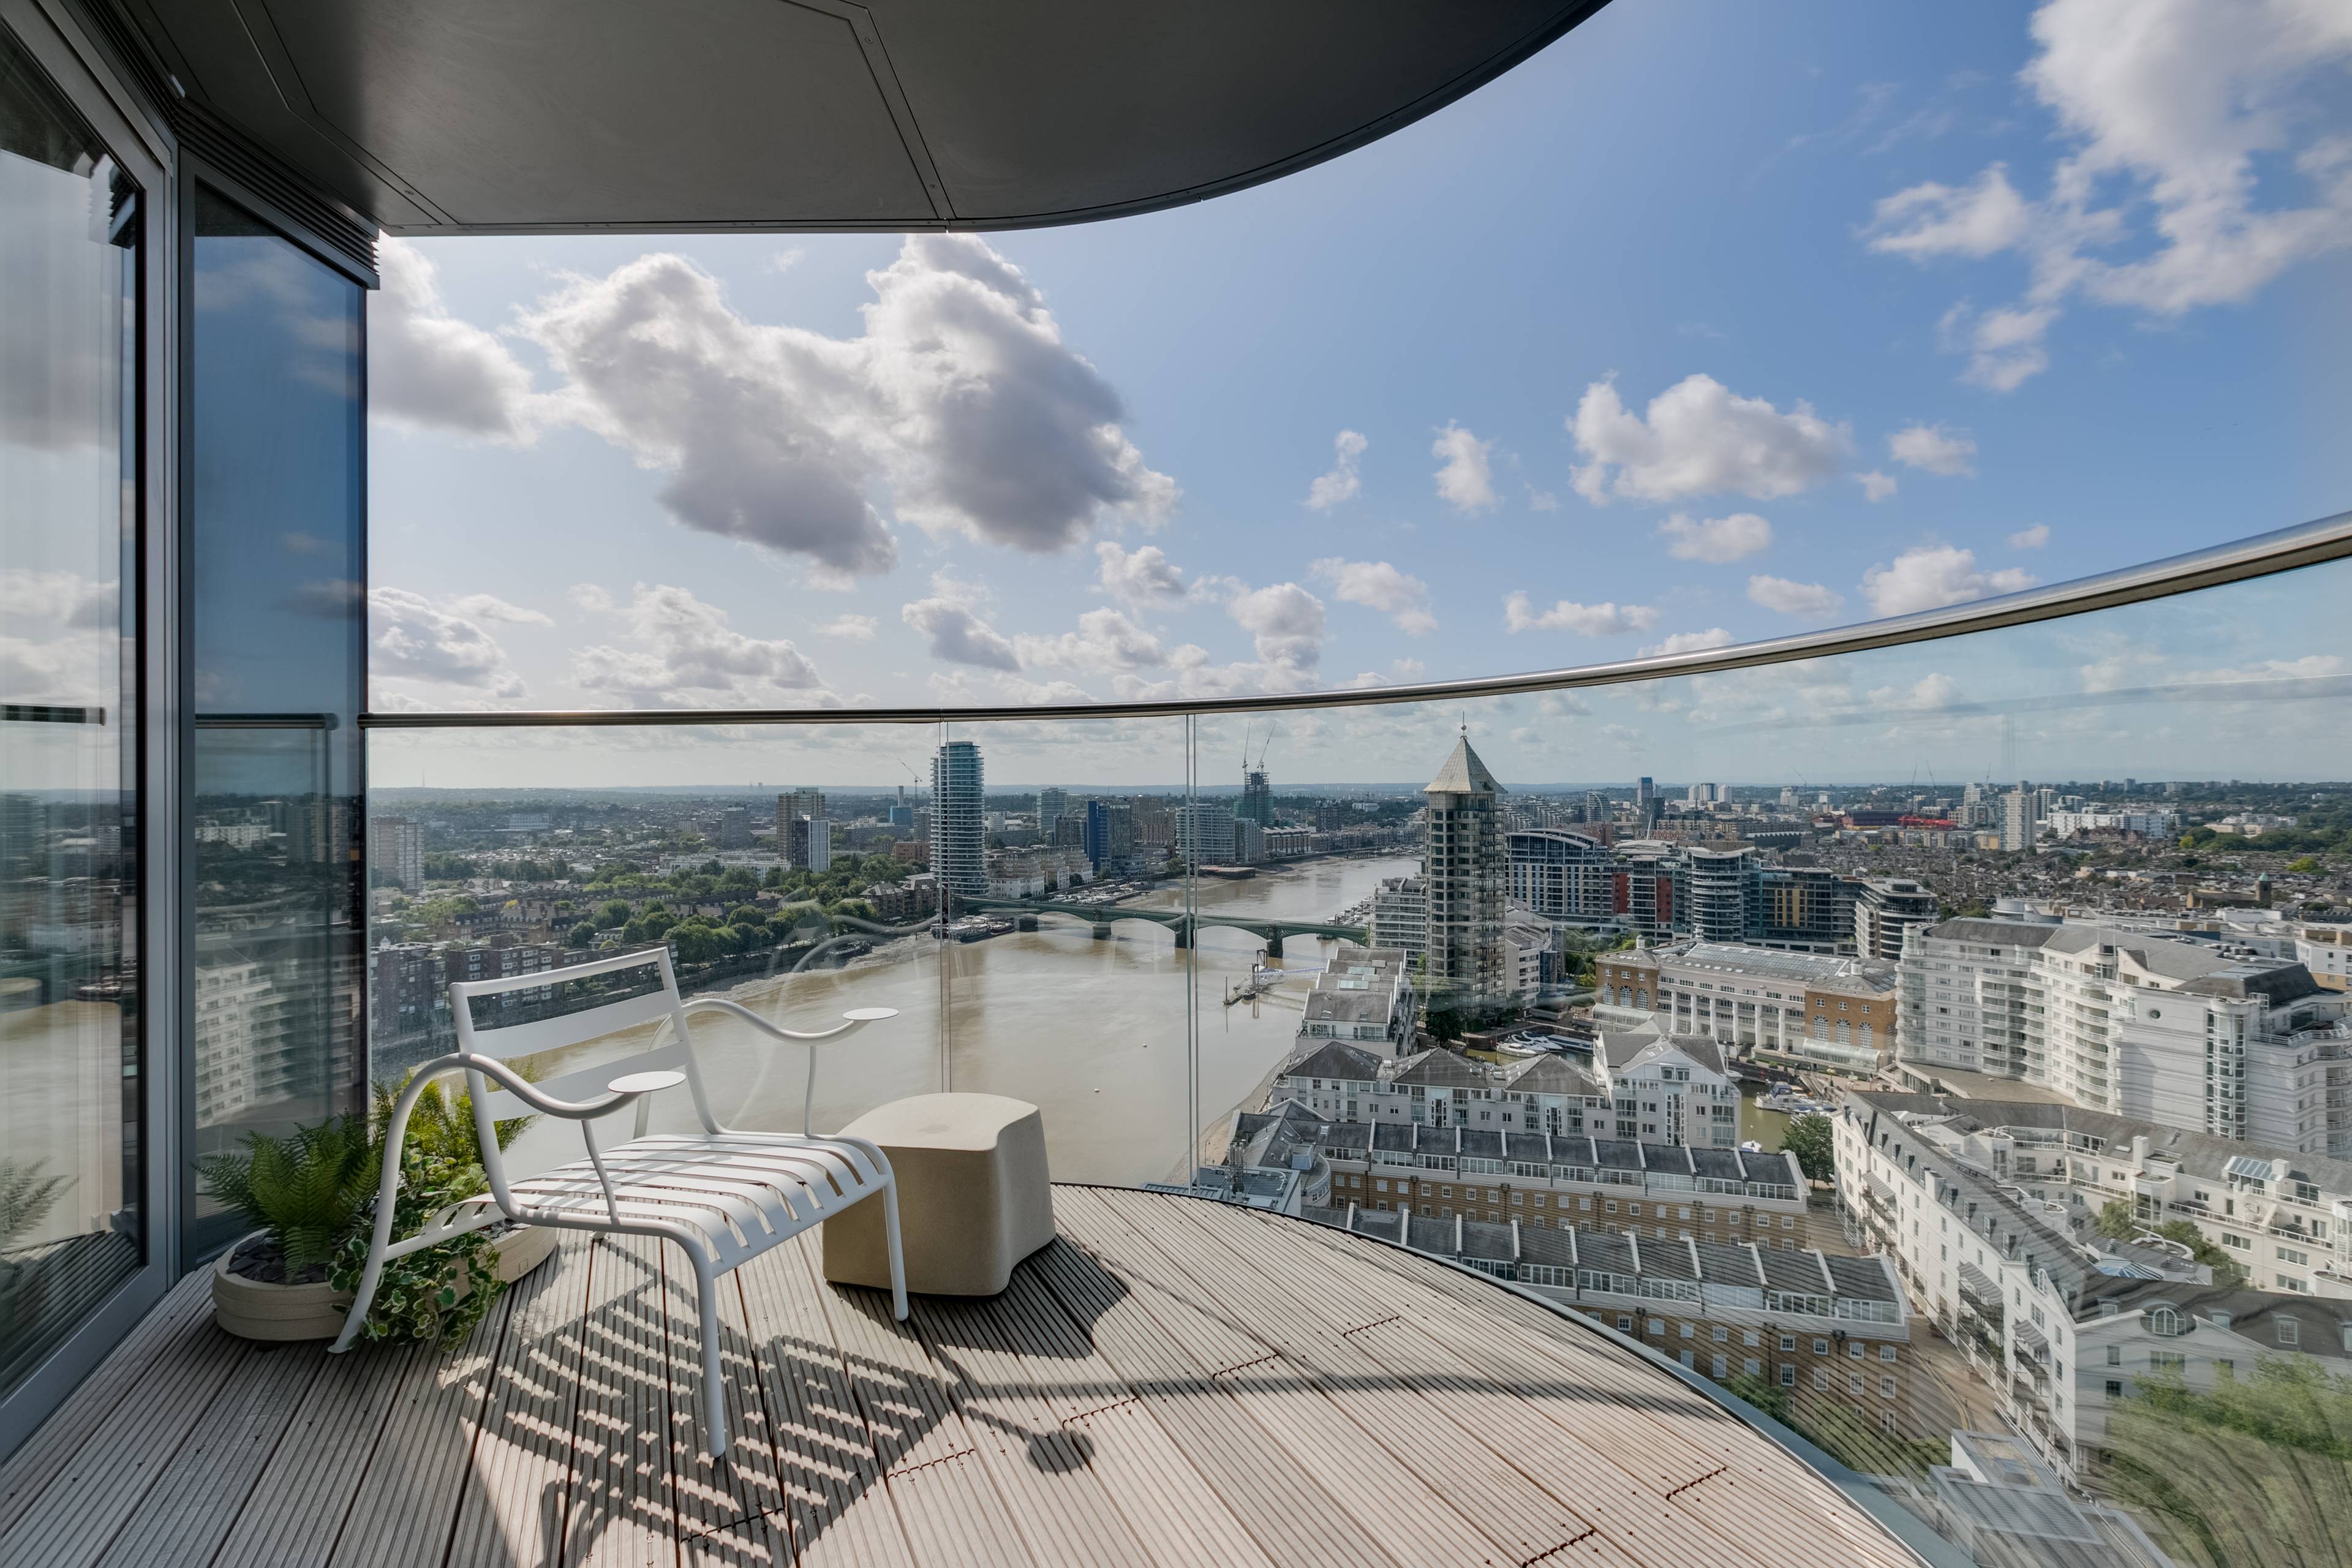 Brilliant 4-bed apartment at the 12th floor of a high spec building with breathtaking views across the River Thames and the London Skyline.